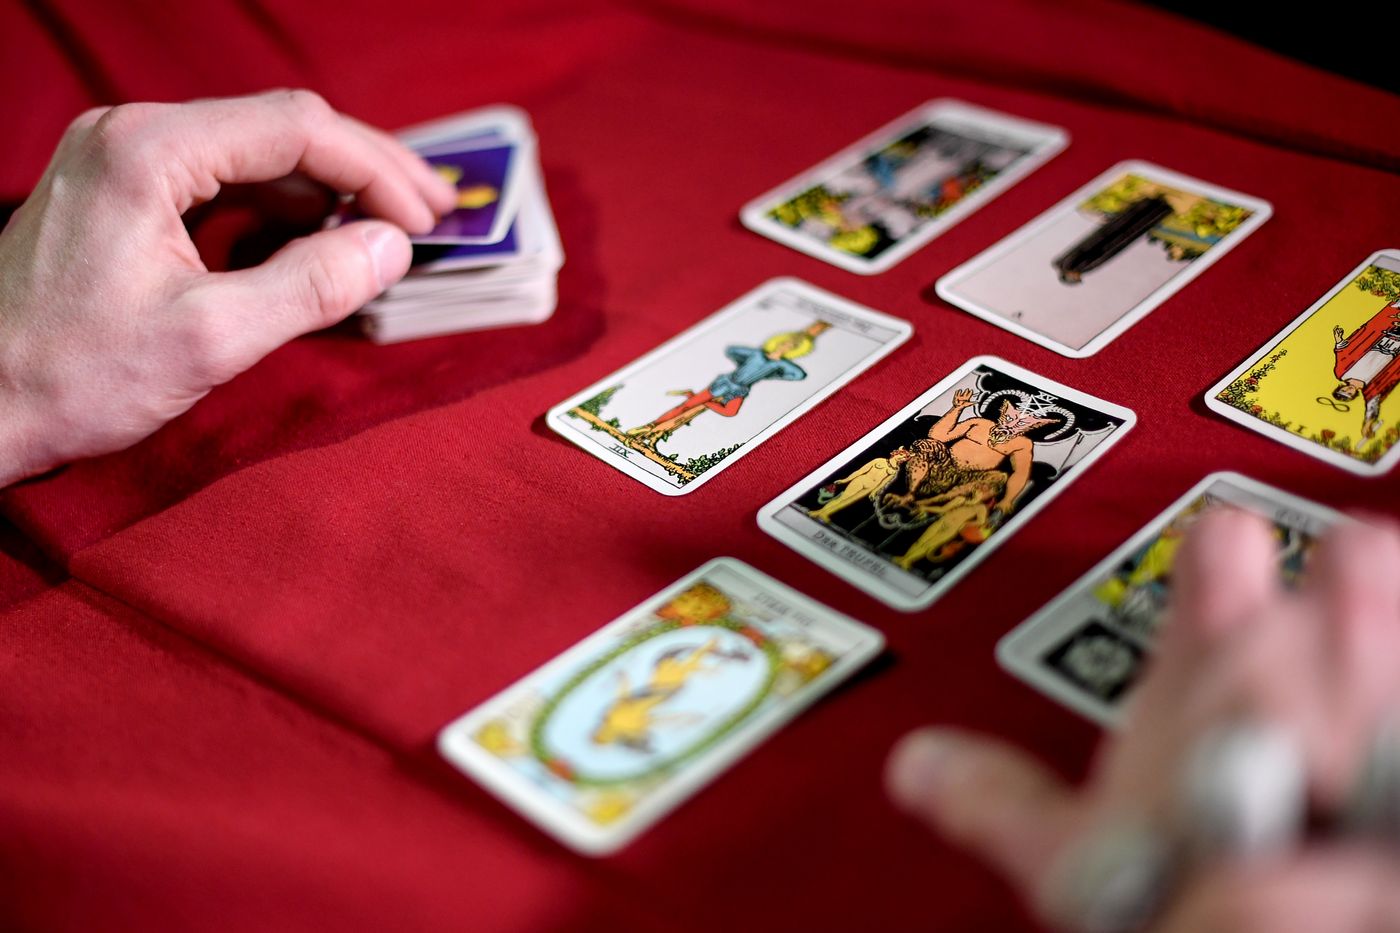 7 tips for getting the most out of your next tarot card reading